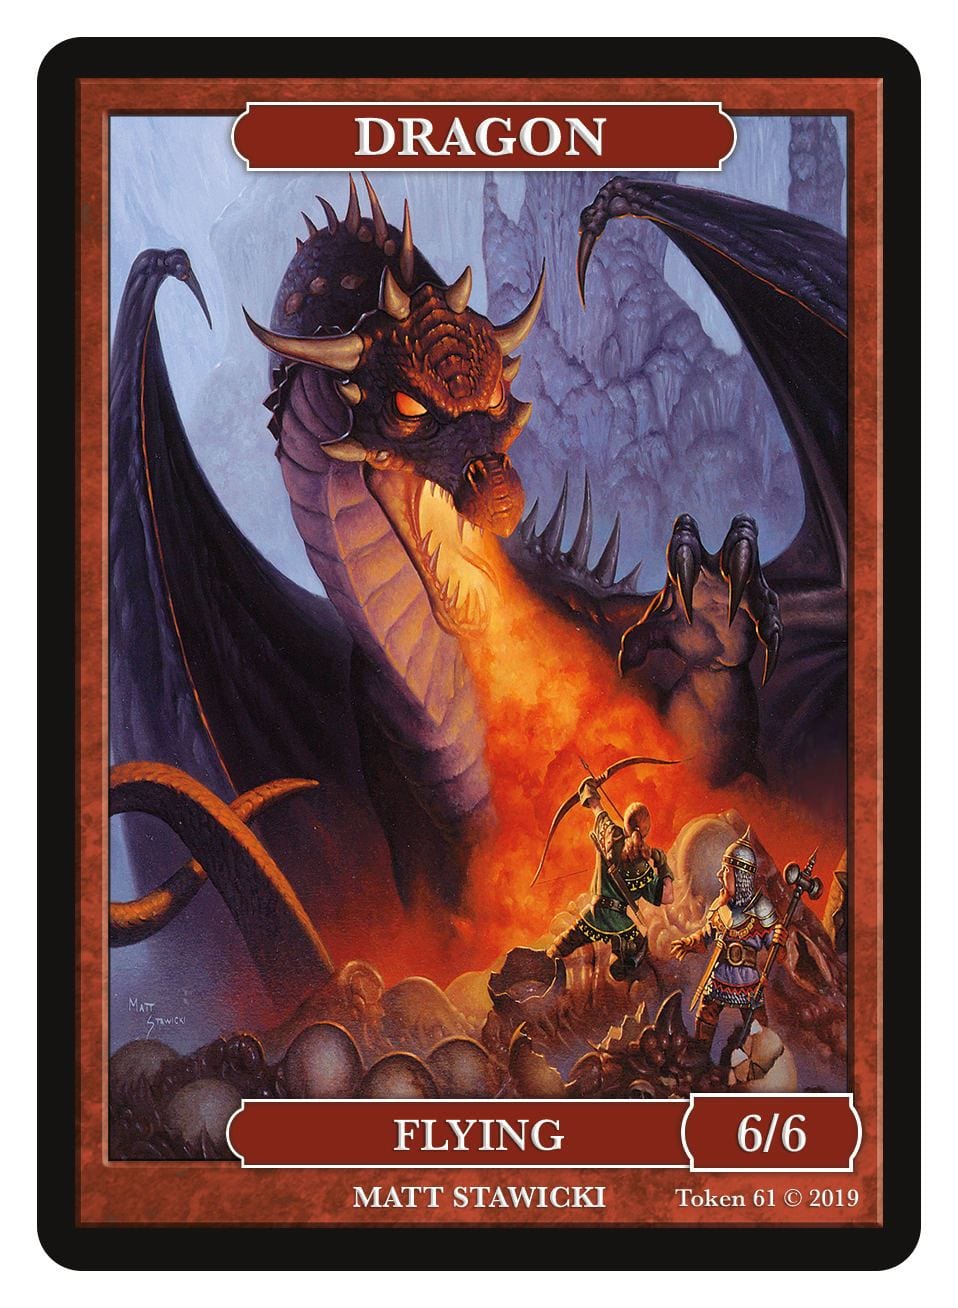 Dragon Token (6/6 - Flying) by Matt Stawicki - Token - Original Magic Art - Accessories for Magic the Gathering and other card games